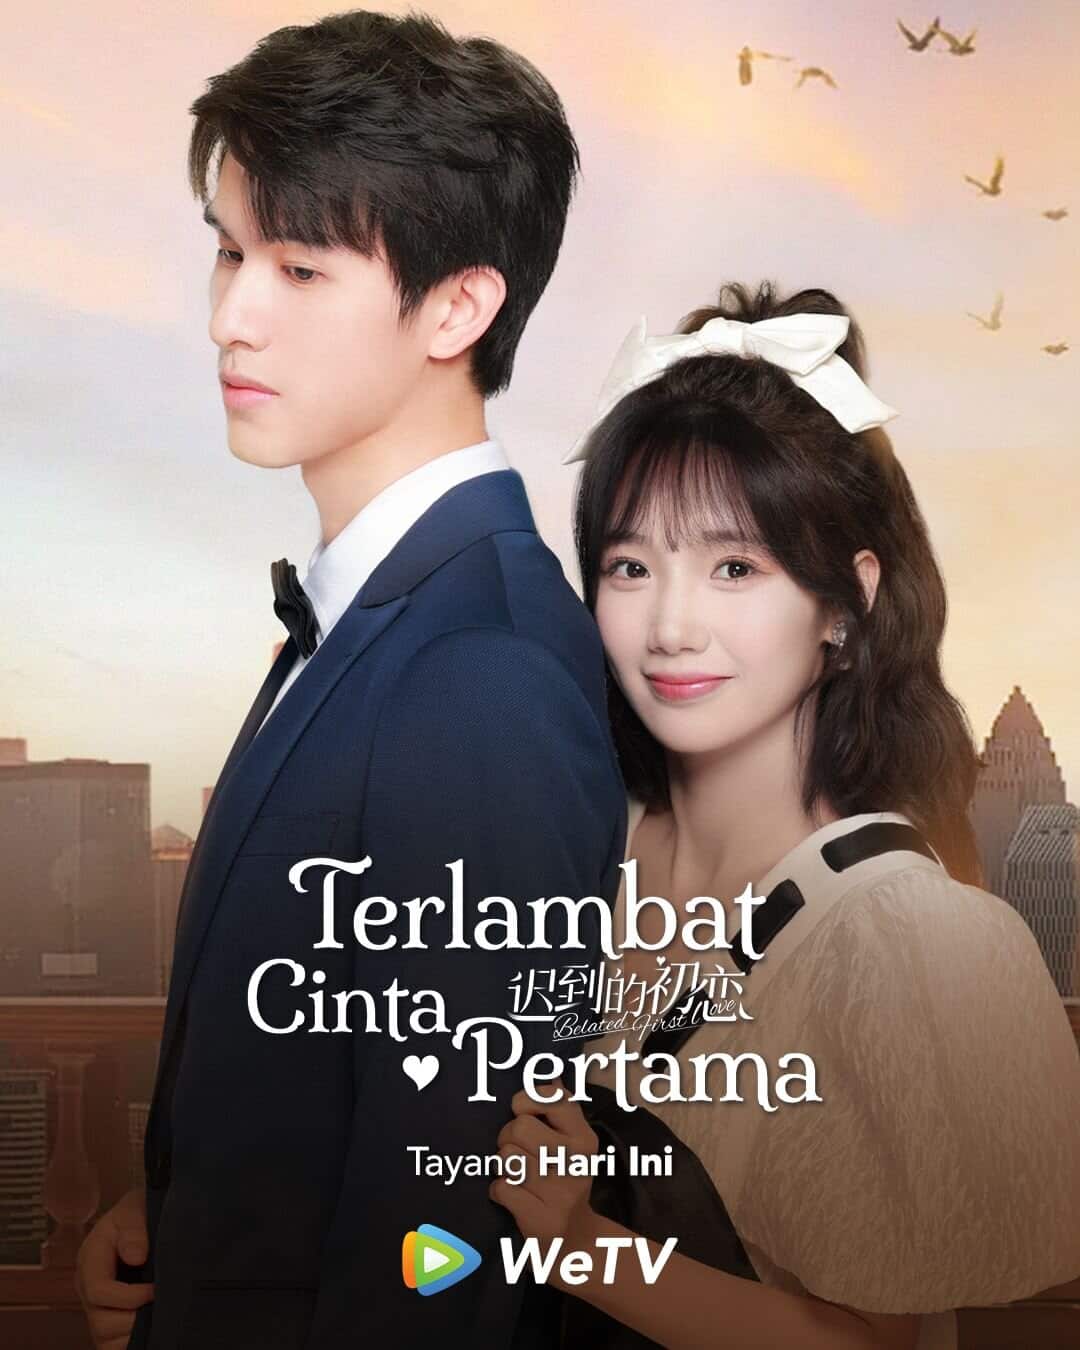 Belated First Love - Sinopsis, Pemain, OST, Episode, Review